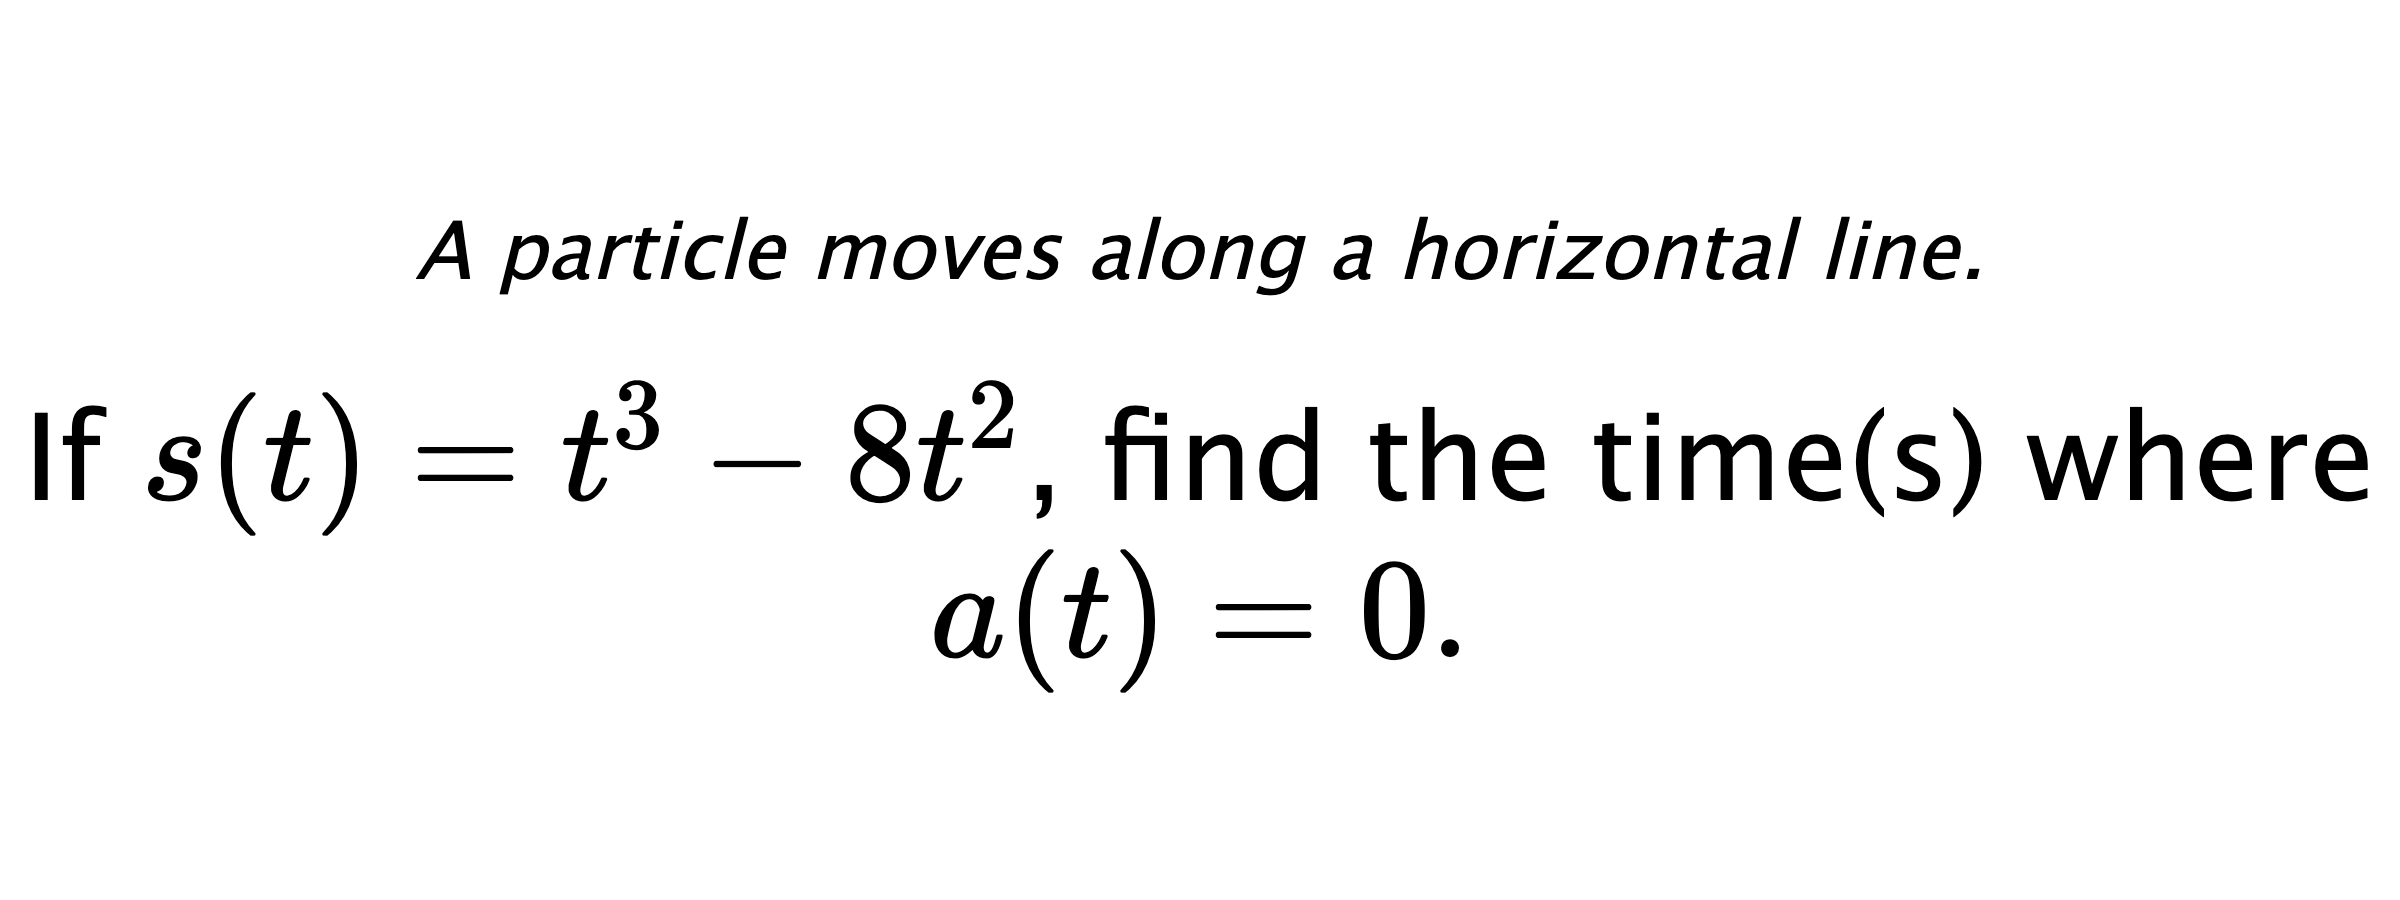 A particle moves along a horizontal line. If $ s(t)=t^3-8t^2 $, find the time(s) where $ a(t)=0. $